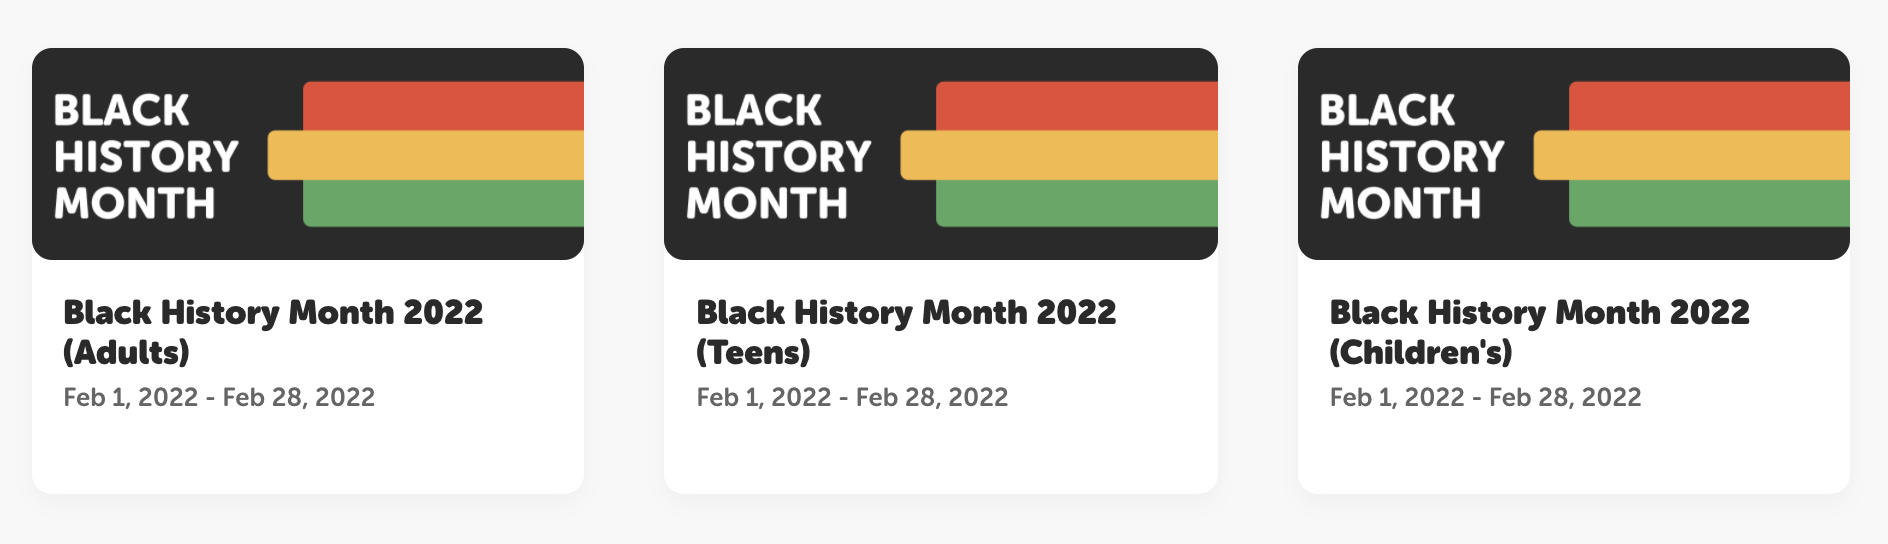 Black History Month Beanstack Challenges